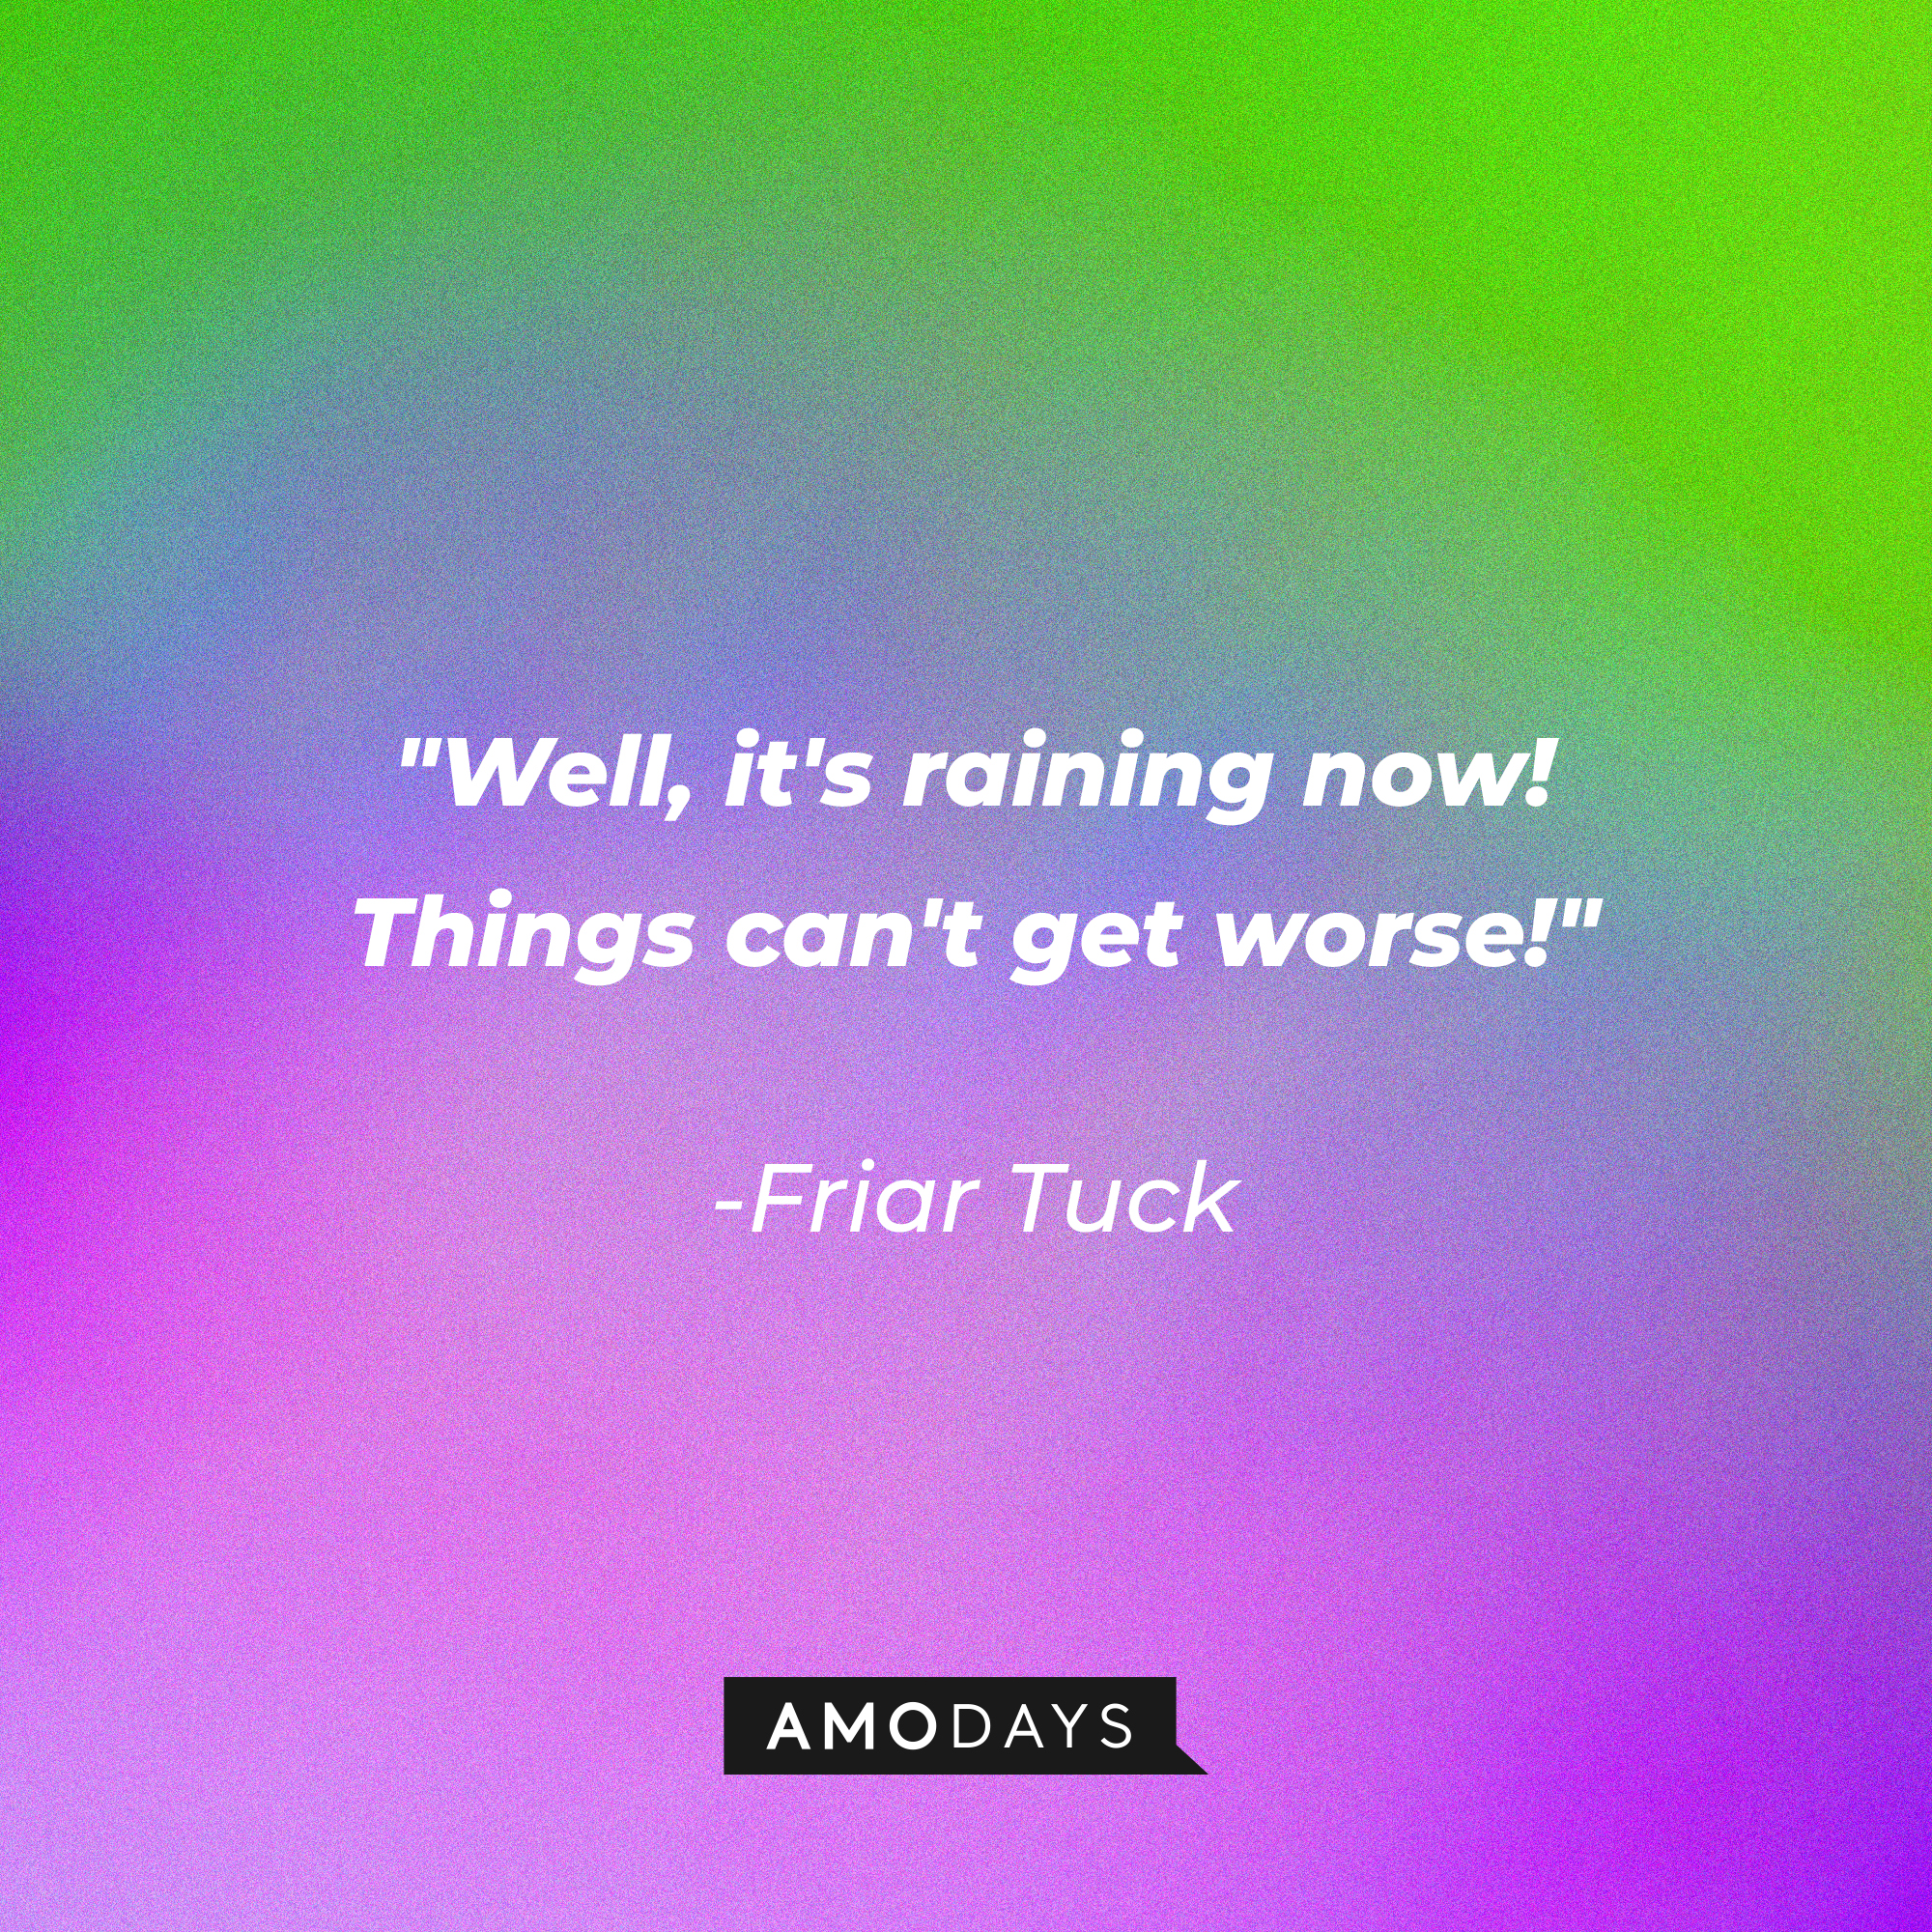 Friar Tuck's quote: "Well, it's raining now! Things can't get worse!" | Source: Amodays